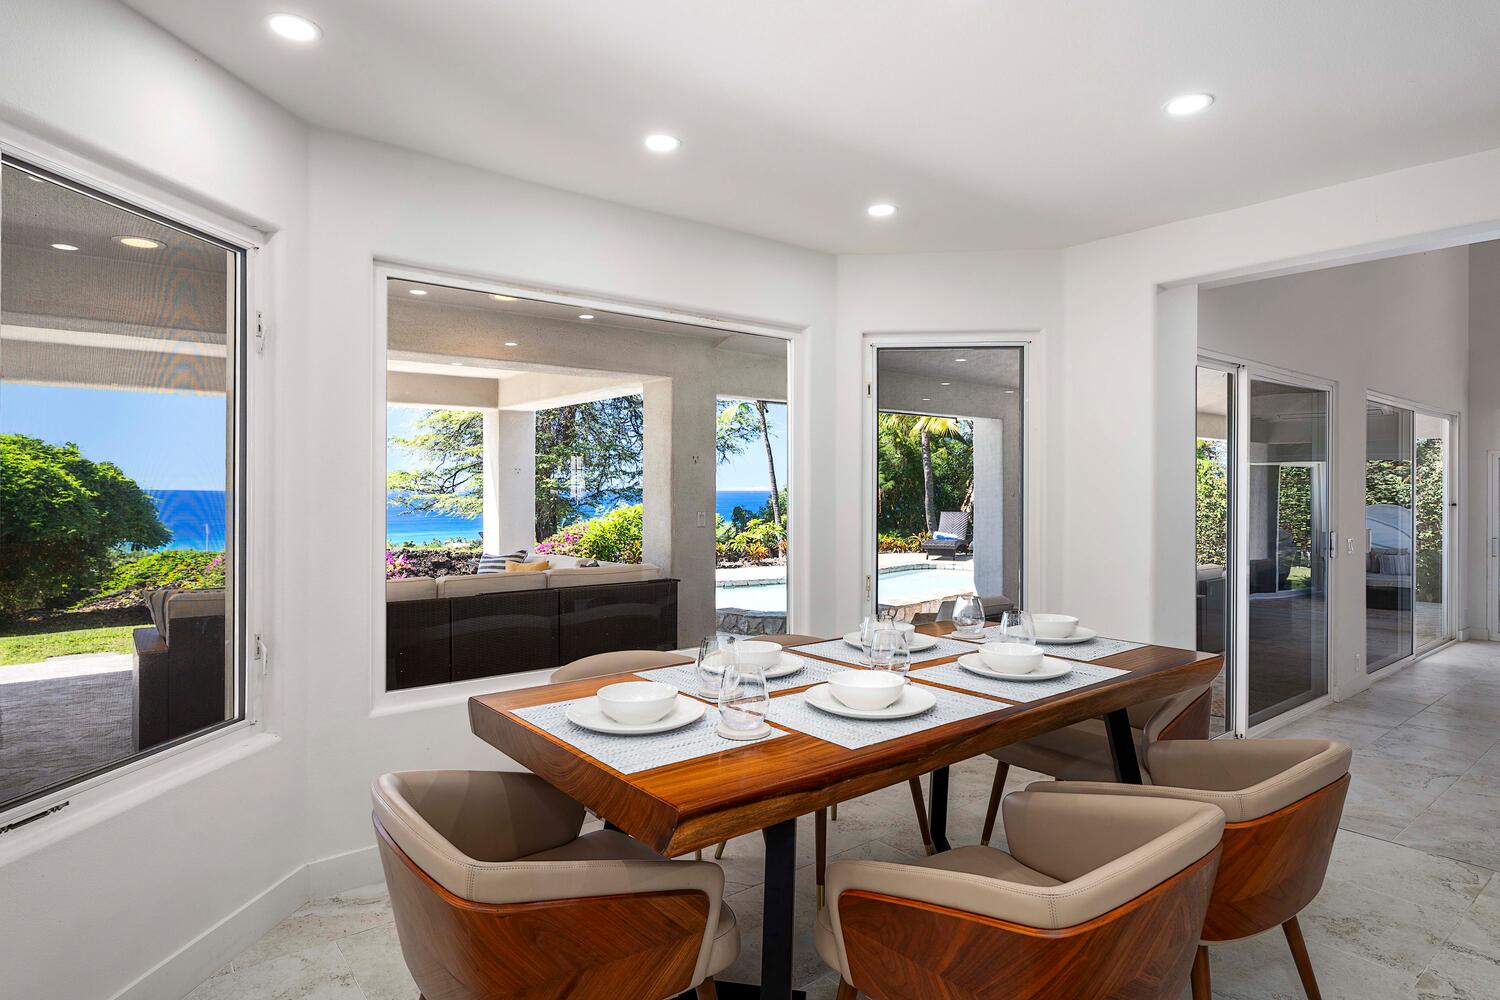 Kailua Kona Vacation Rentals, Ho'okipa Hale - Open concept floorplan bringing everyone together in a space that's both inviting and expansive.